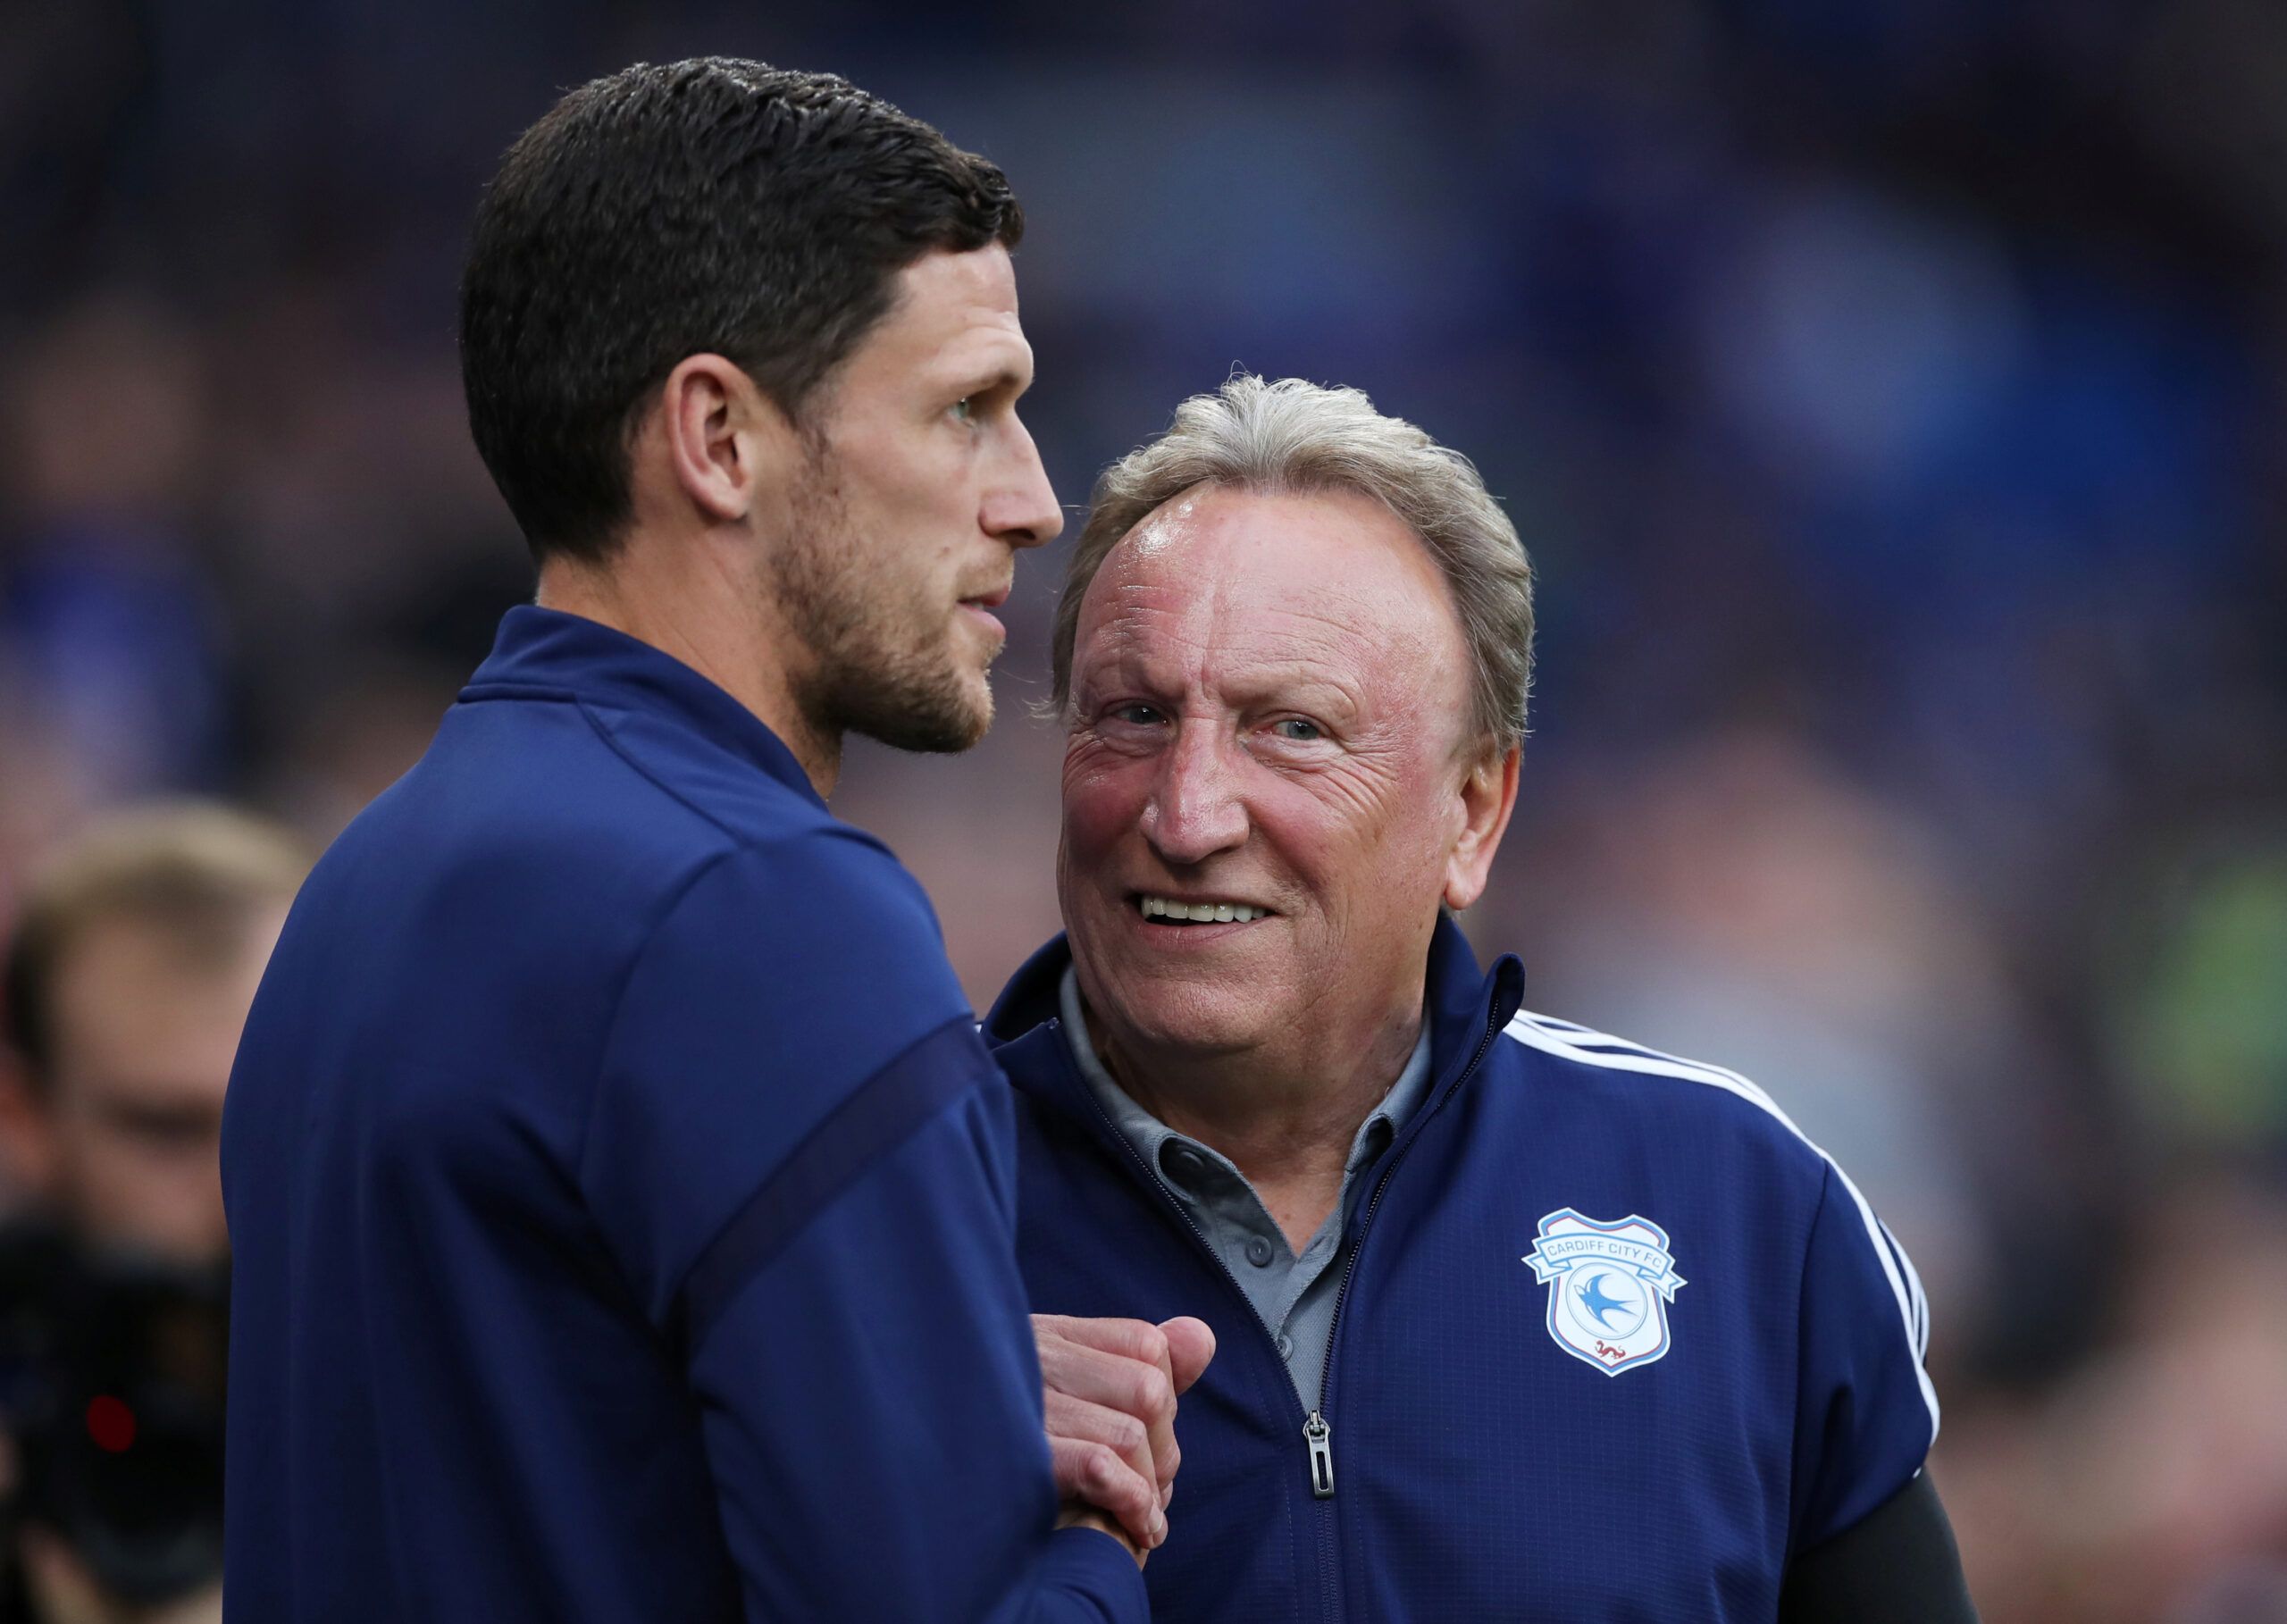 Soccer Football - Championship - Cardiff City v Huddersfield Town - Cardiff City Stadium, Cardiff, Britain - August 21, 2019   Huddersfield Town caretaker manager Mark Hudson and Cardiff City manager Neil Warnock before the match   Action Images/Peter Cziborra    EDITORIAL USE ONLY. No use with unauthorized audio, video, data, fixture lists, club/league logos or 